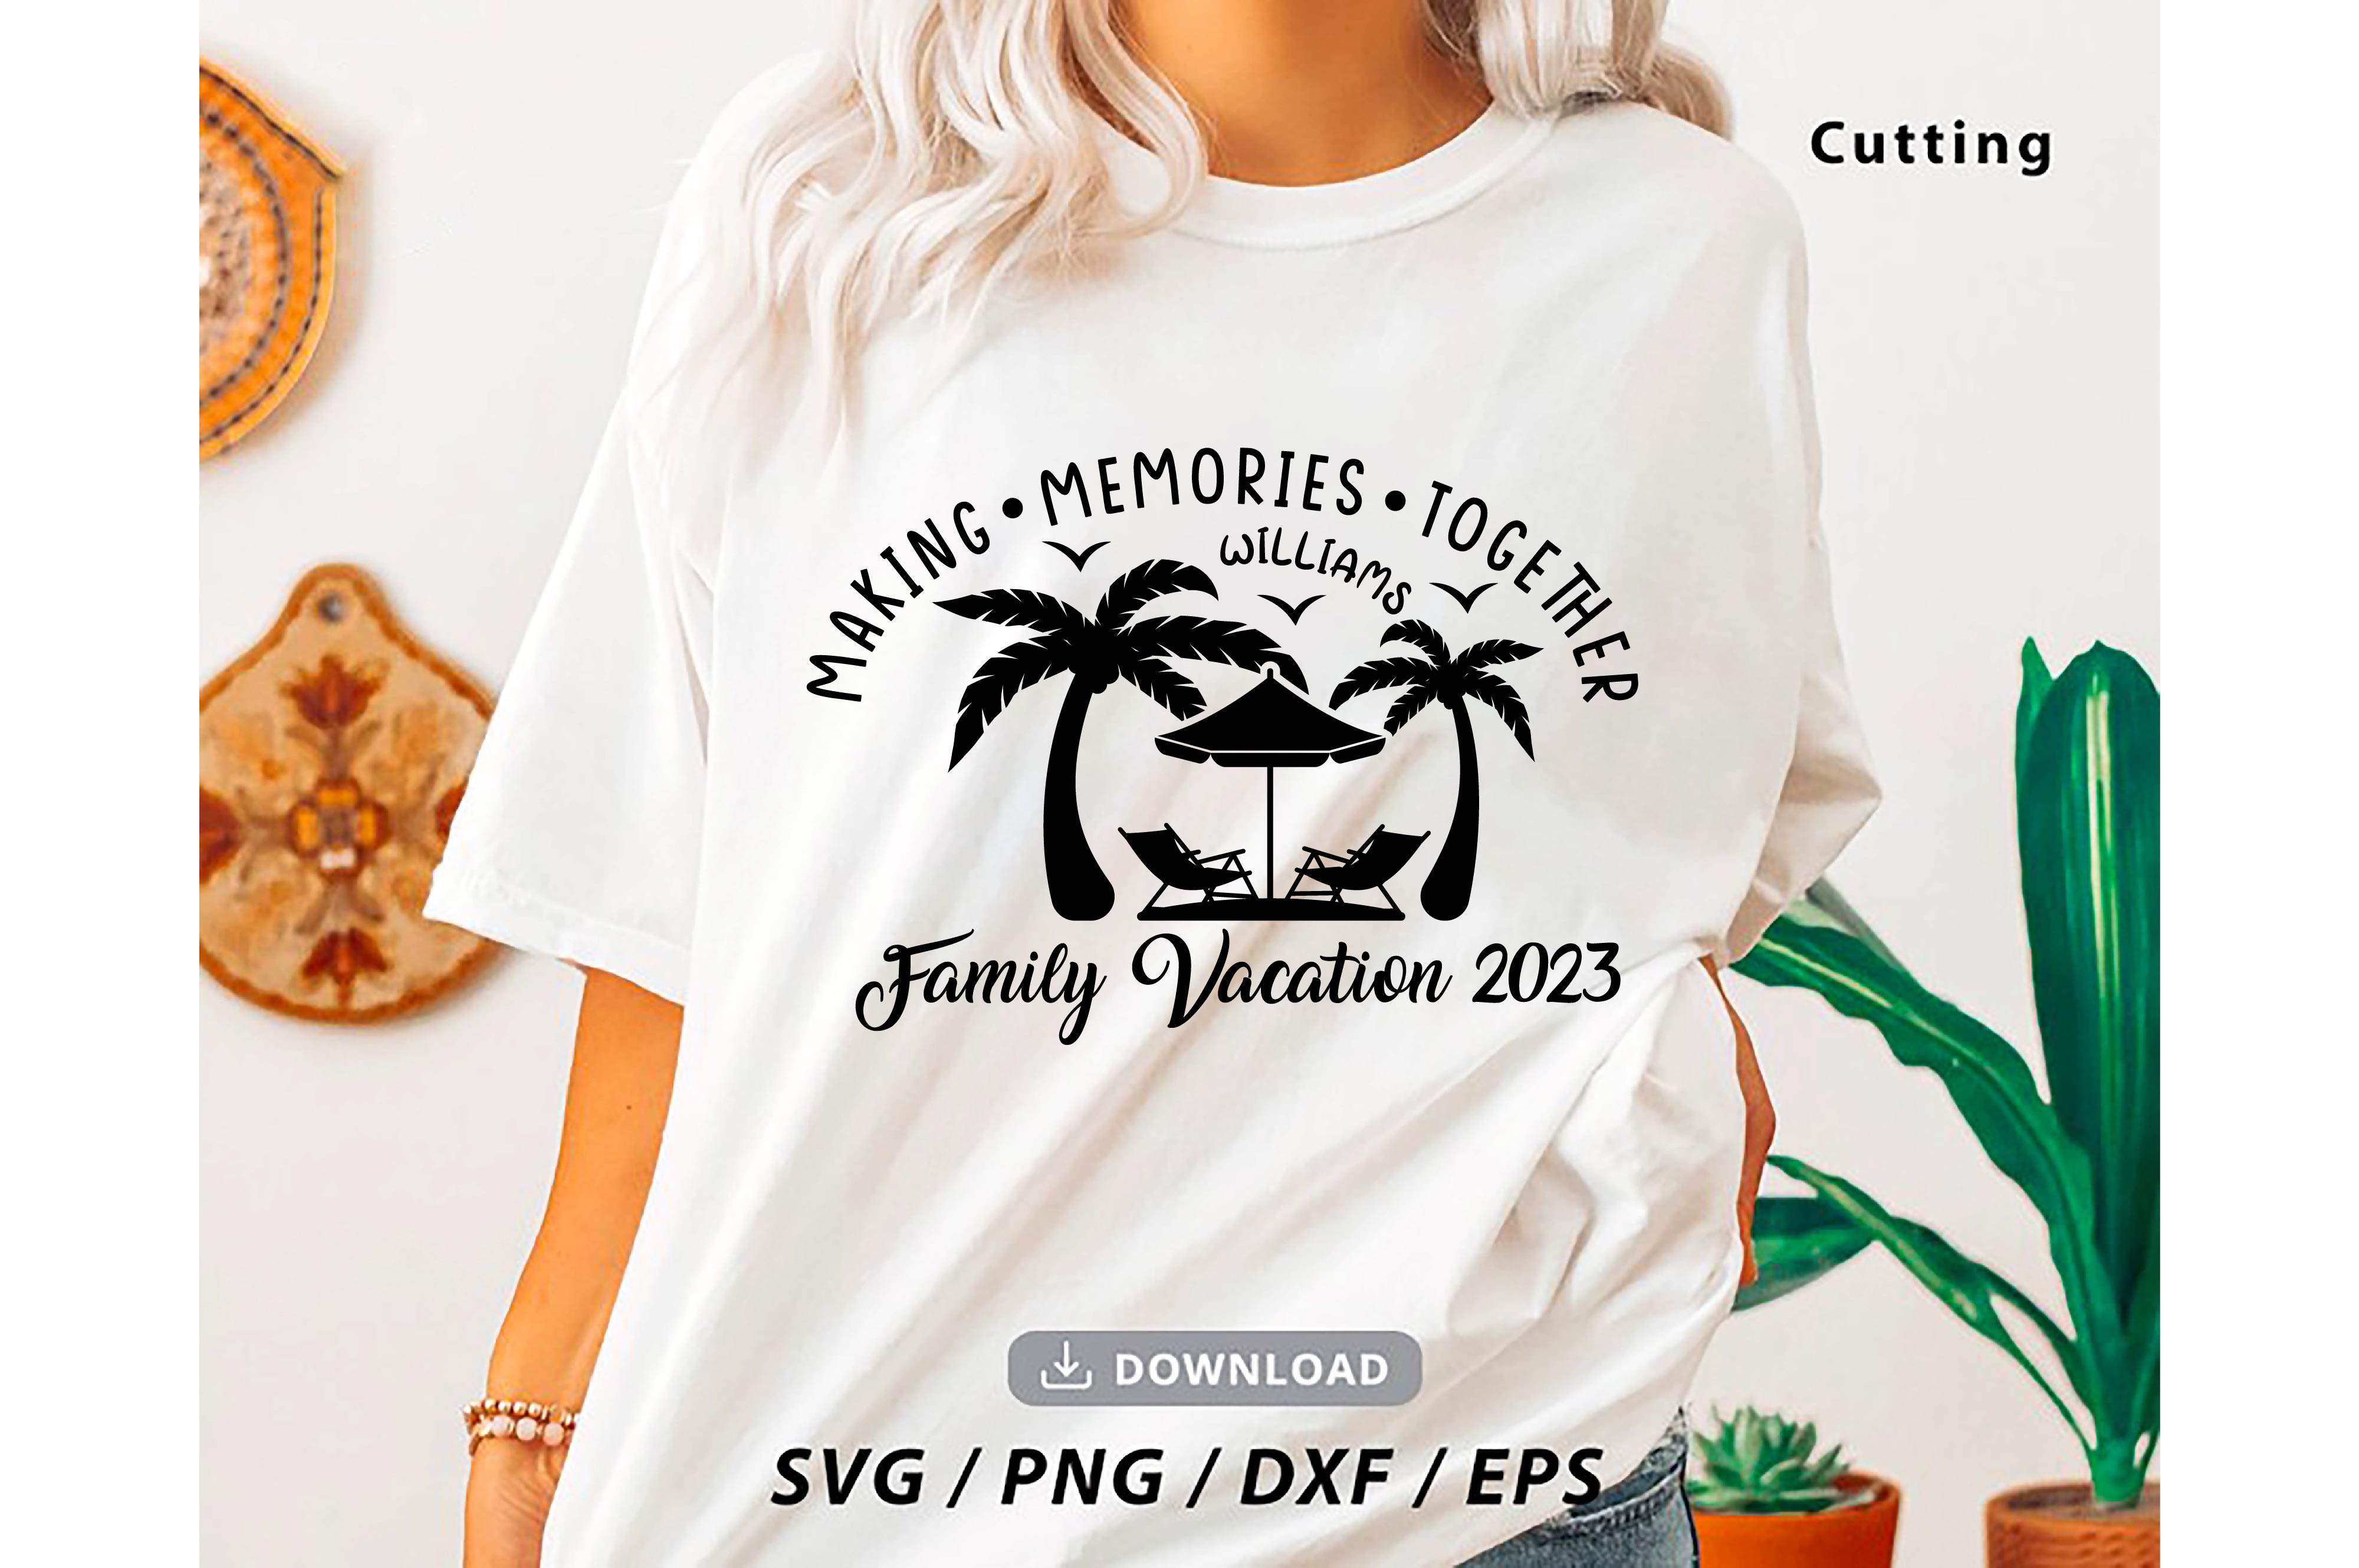 family vacation 2023 svg making memories together custom family vacation cut files summer 2023 vacations 15 315